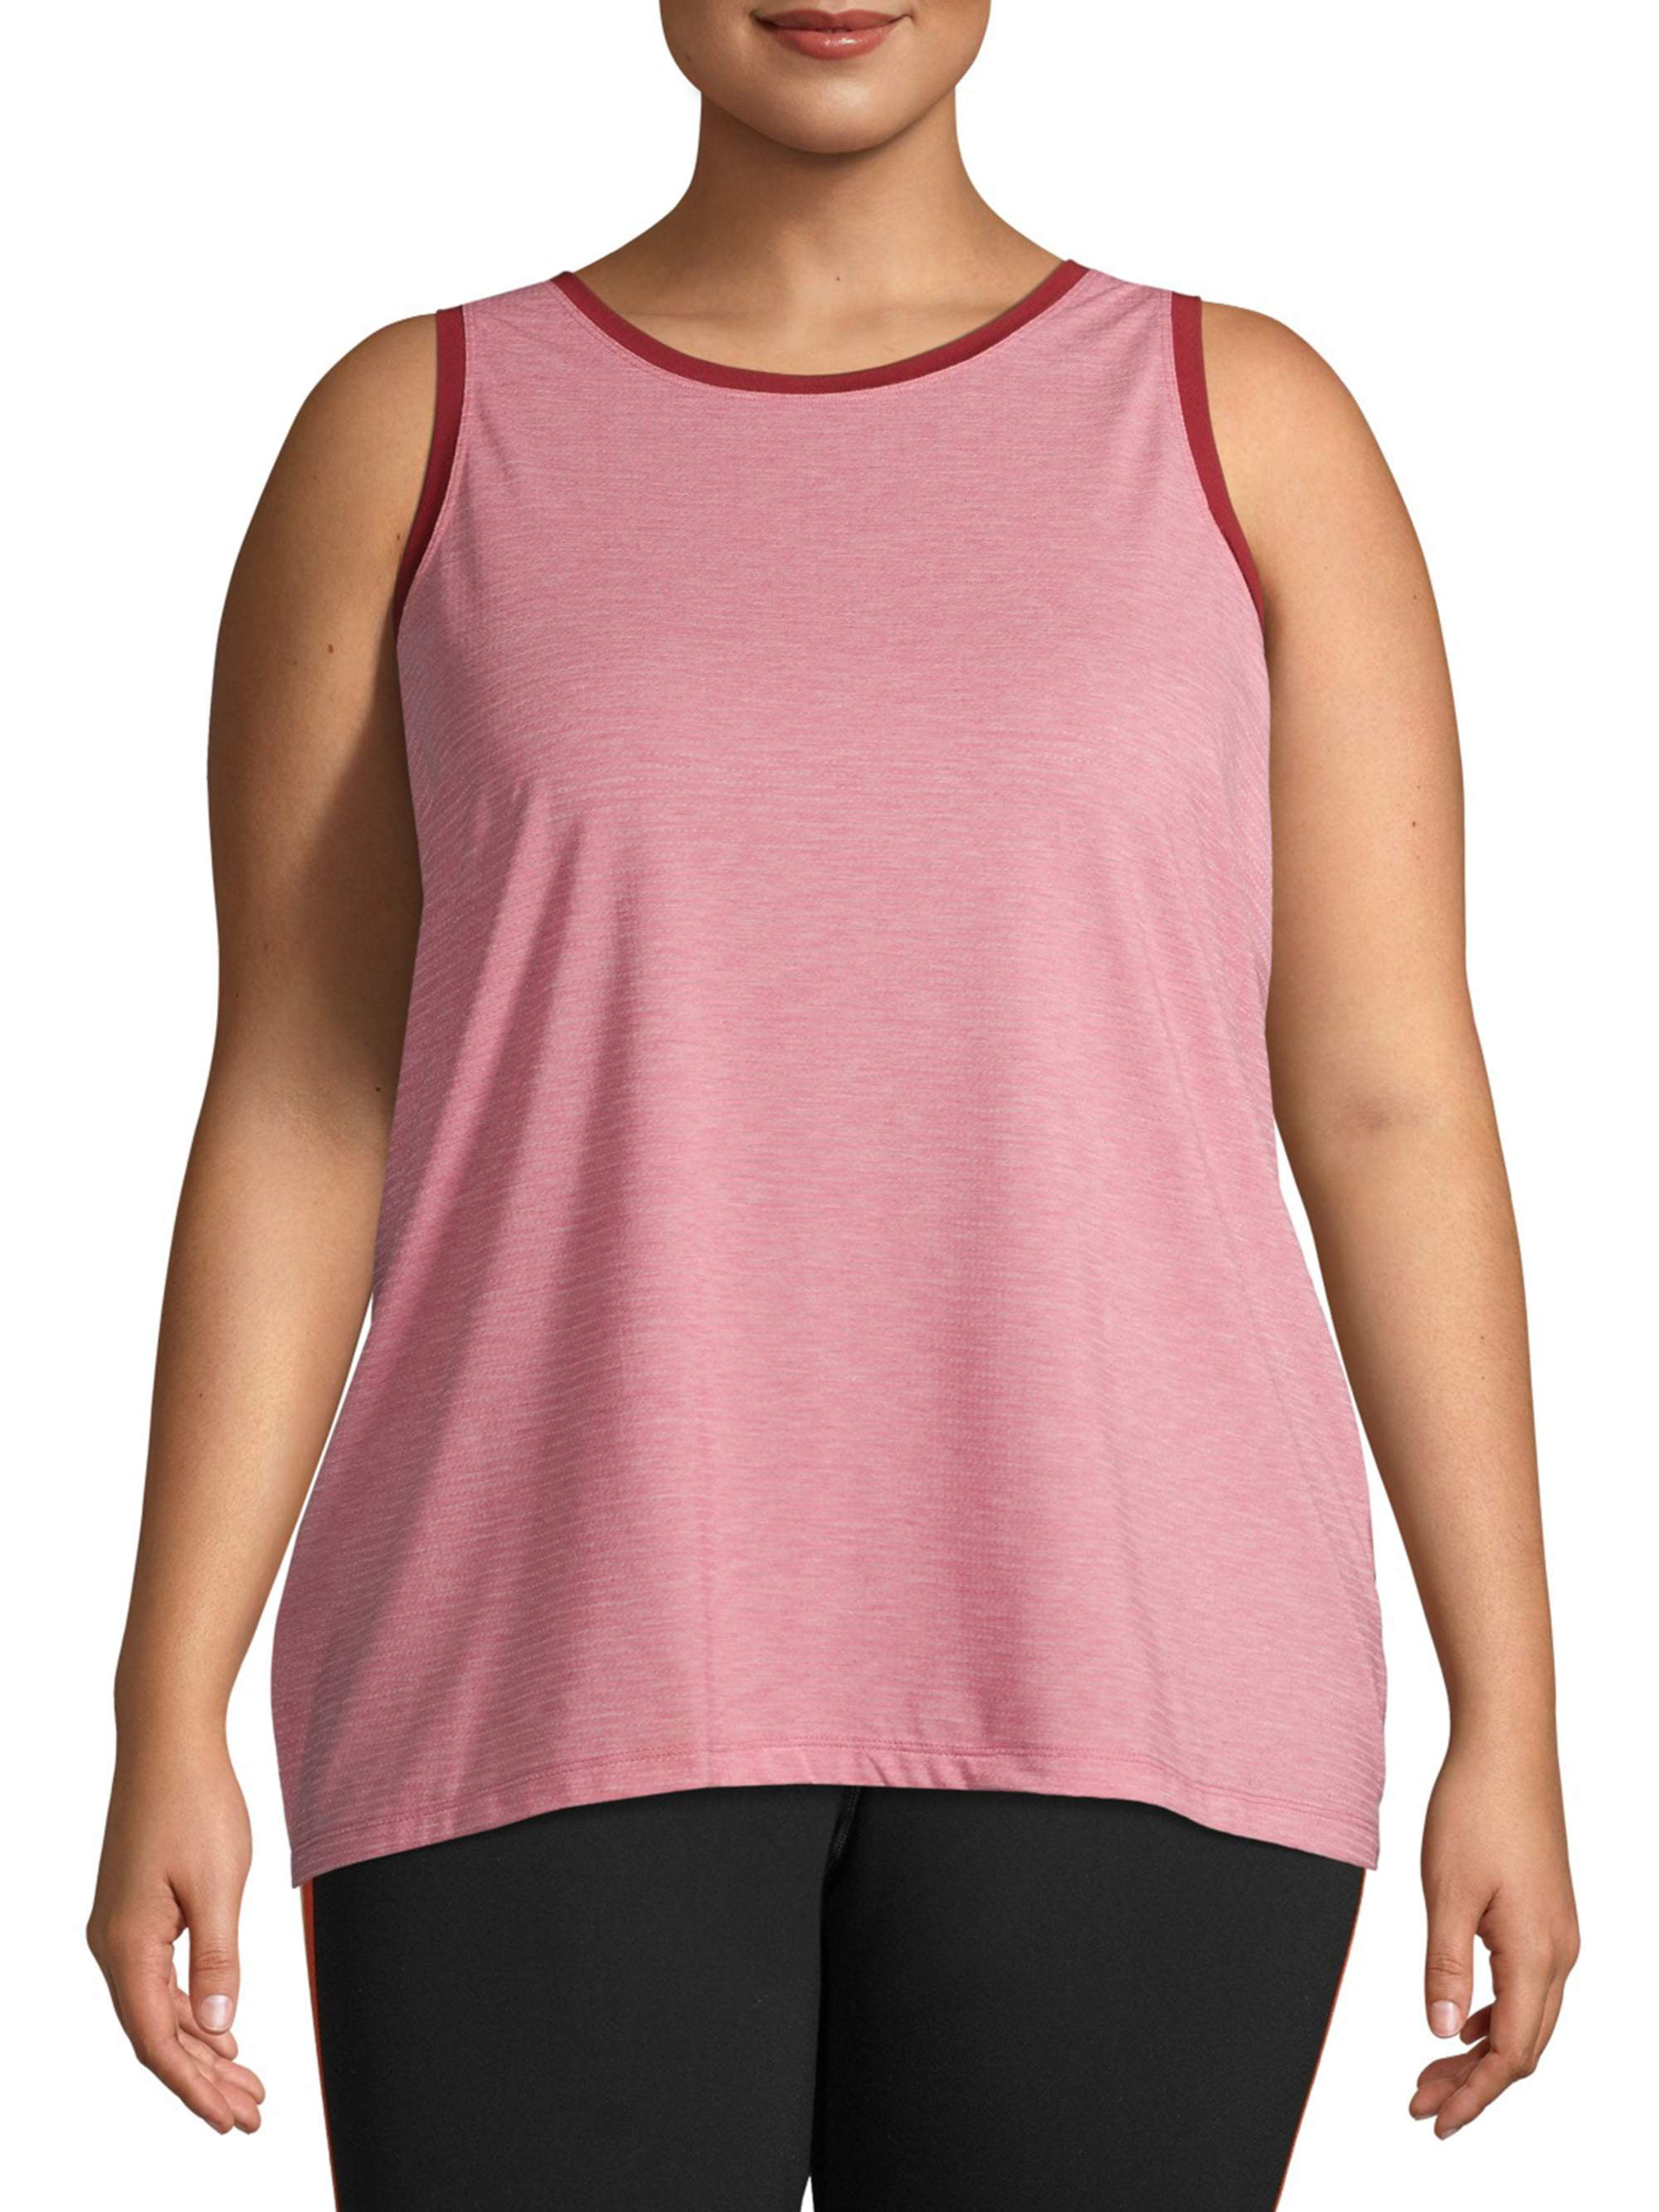 Athletic Works Athletic Works Women S Plus Size Active Tank Top